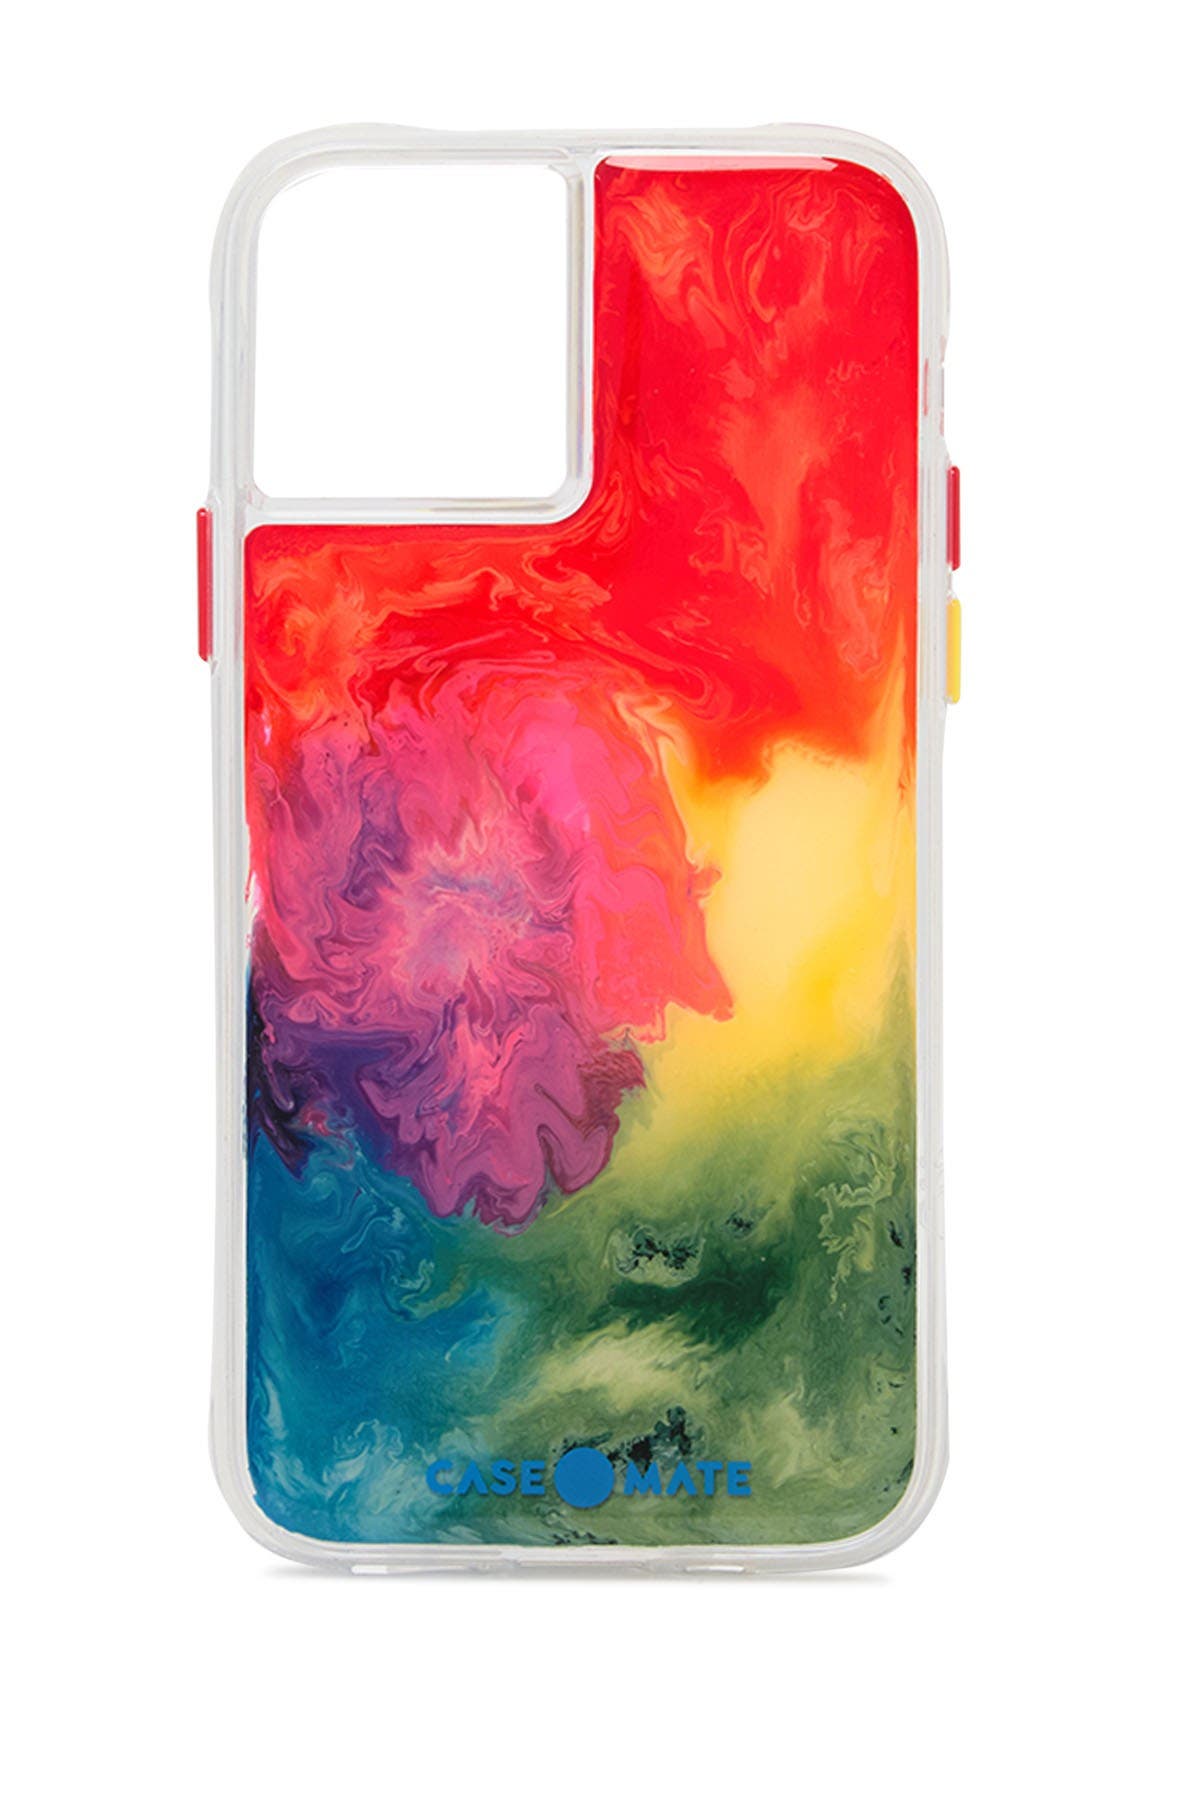 Case-mate Iphone 11 Pro Watercolor